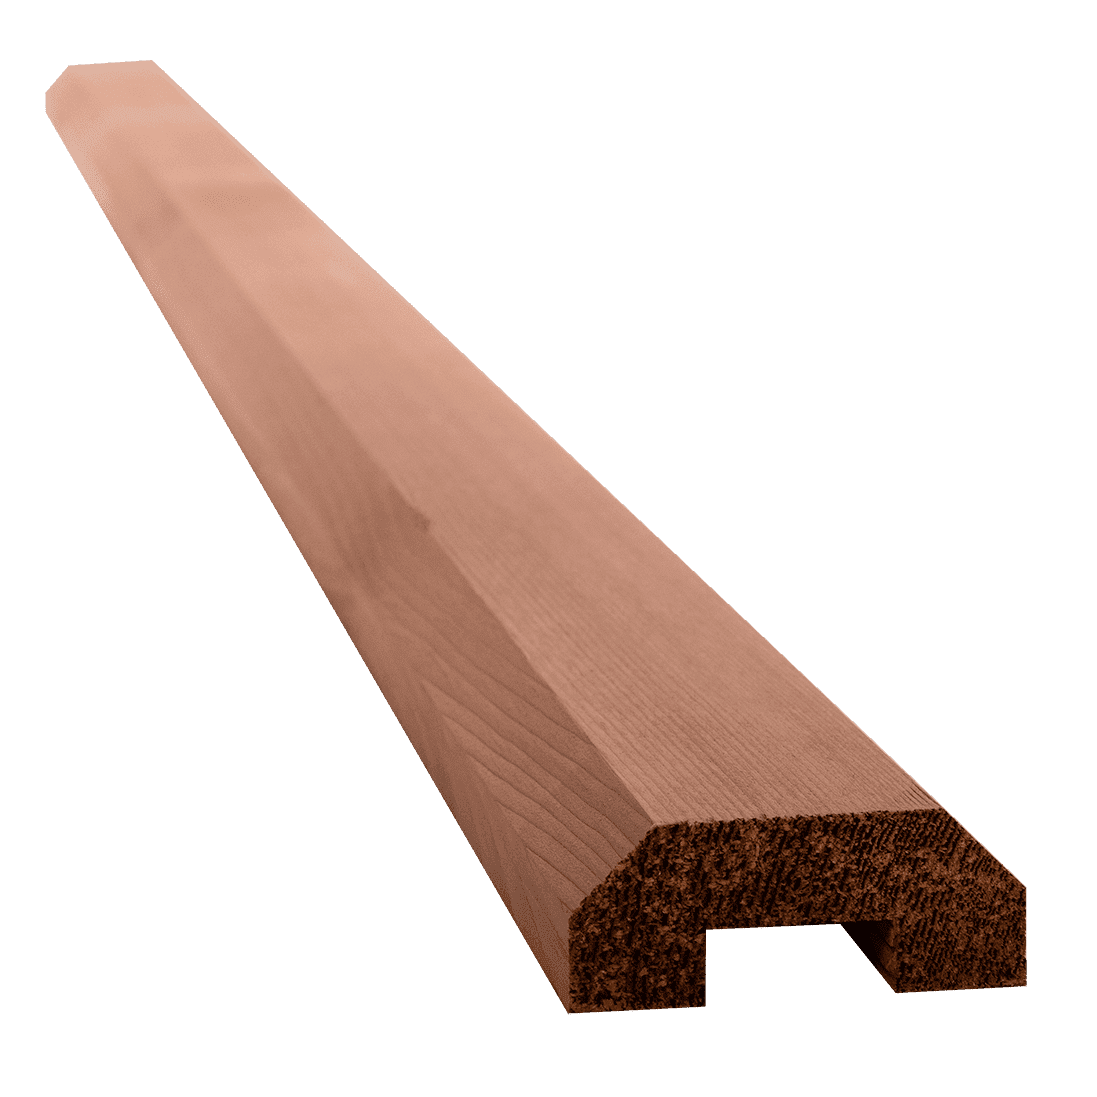 Cequence Capping Rail - Cedar fence capping